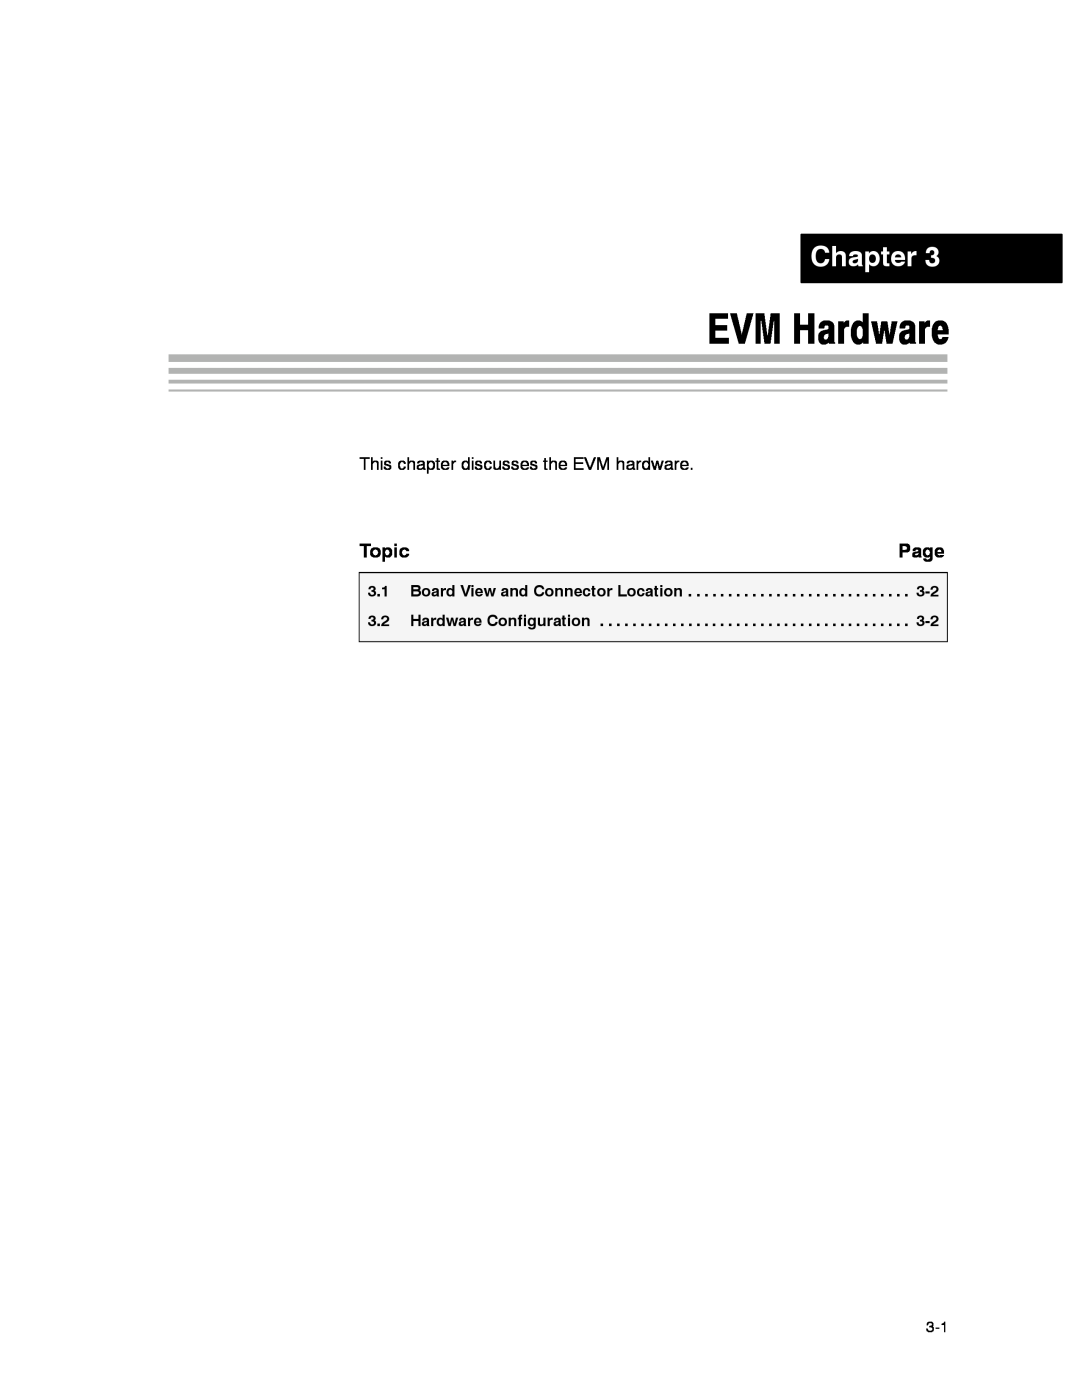 Texas Instruments CDCM7005 manual EVM Hardware, Page, Topic, Chapter 